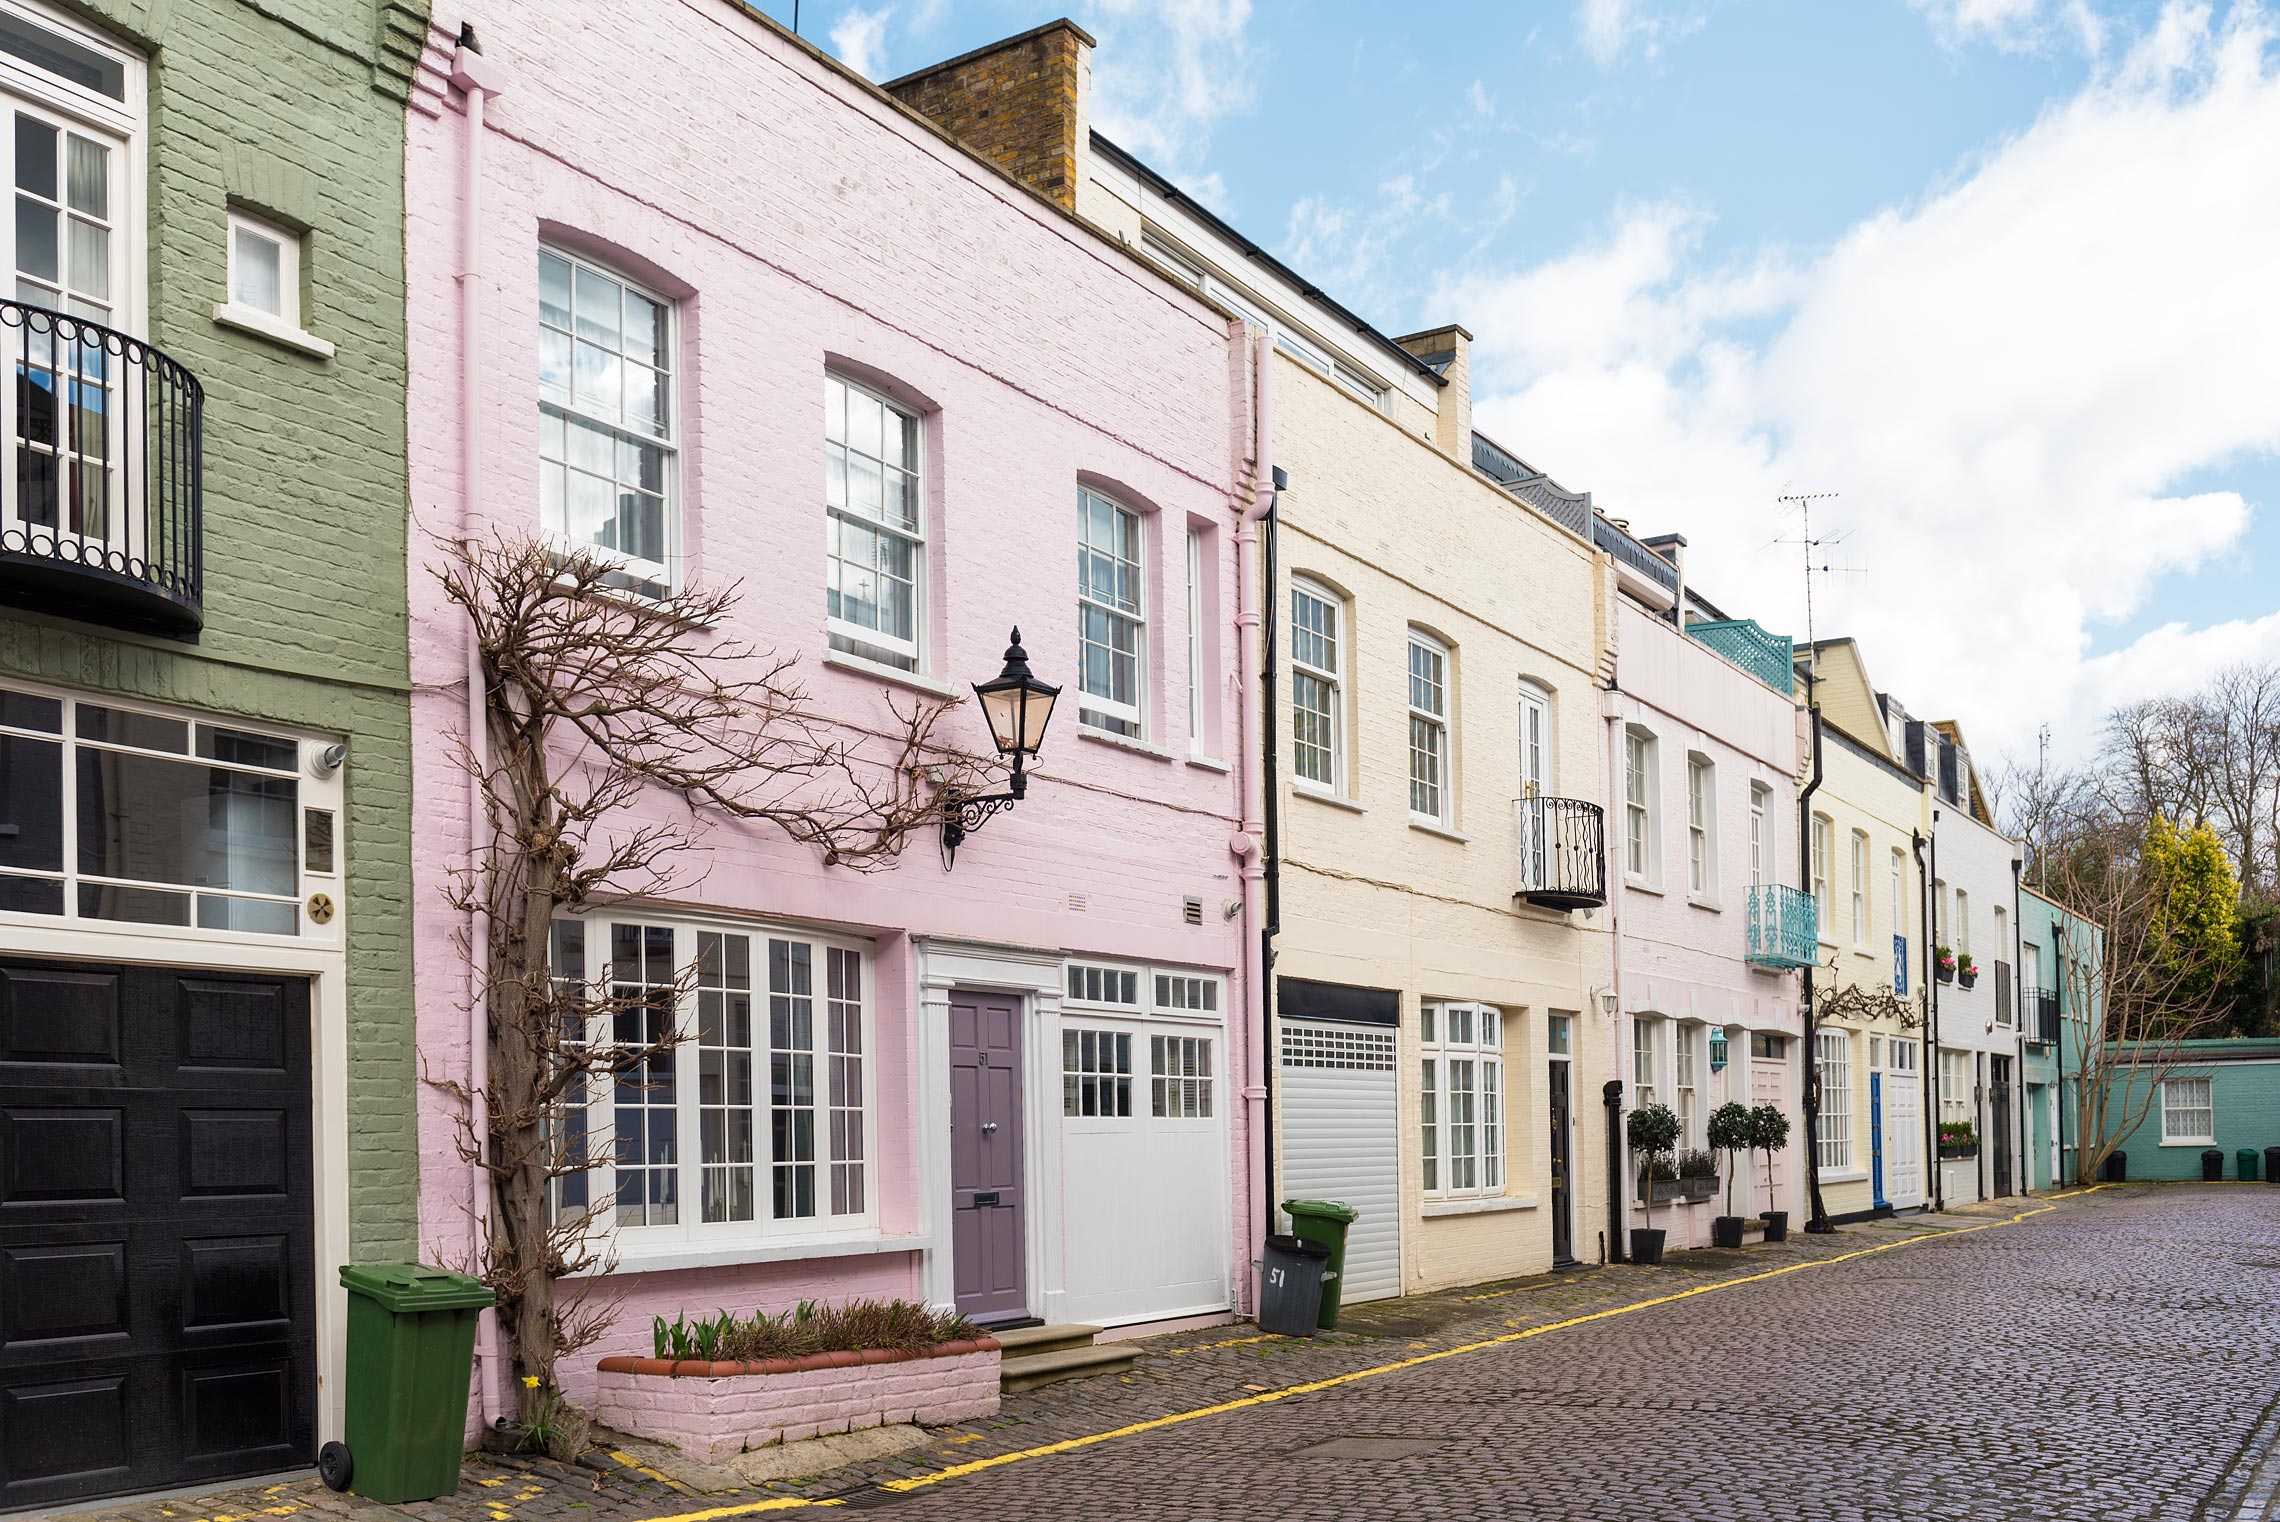 Cutest Streets in London, Atherstone Mews